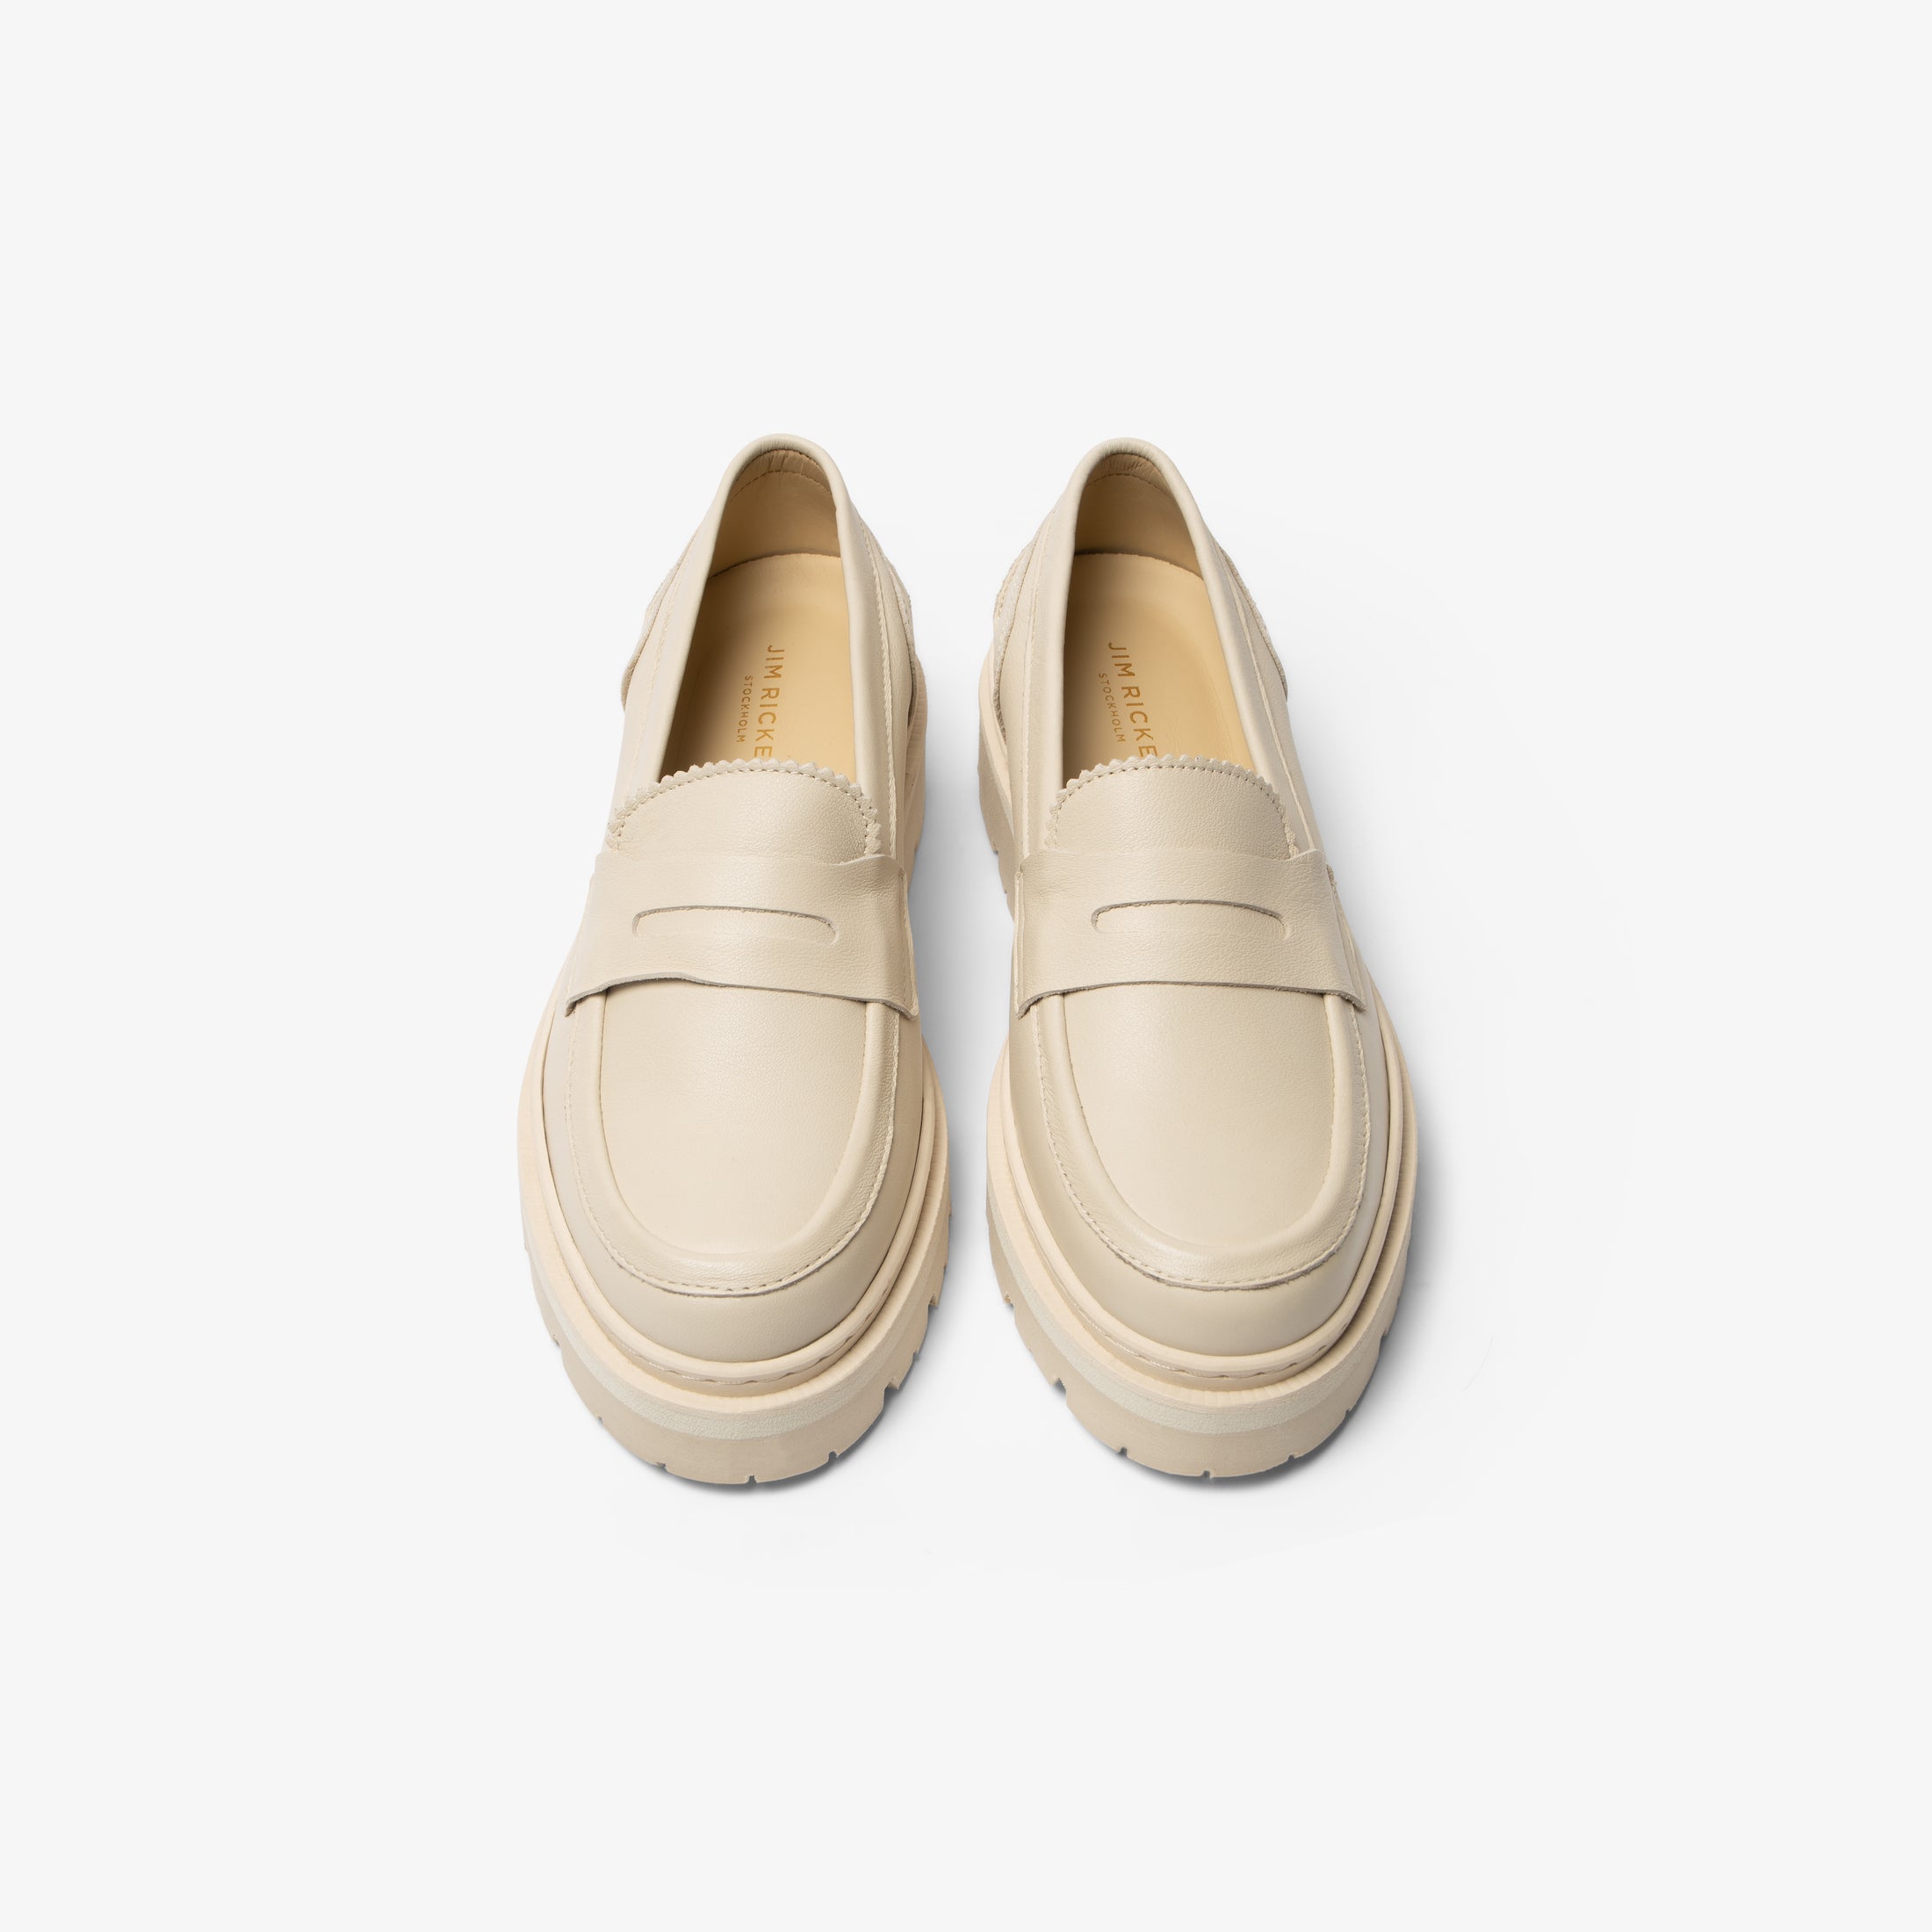 JIM RICKEY PENNY LOAFER POLIDO LEATHER | CREAM